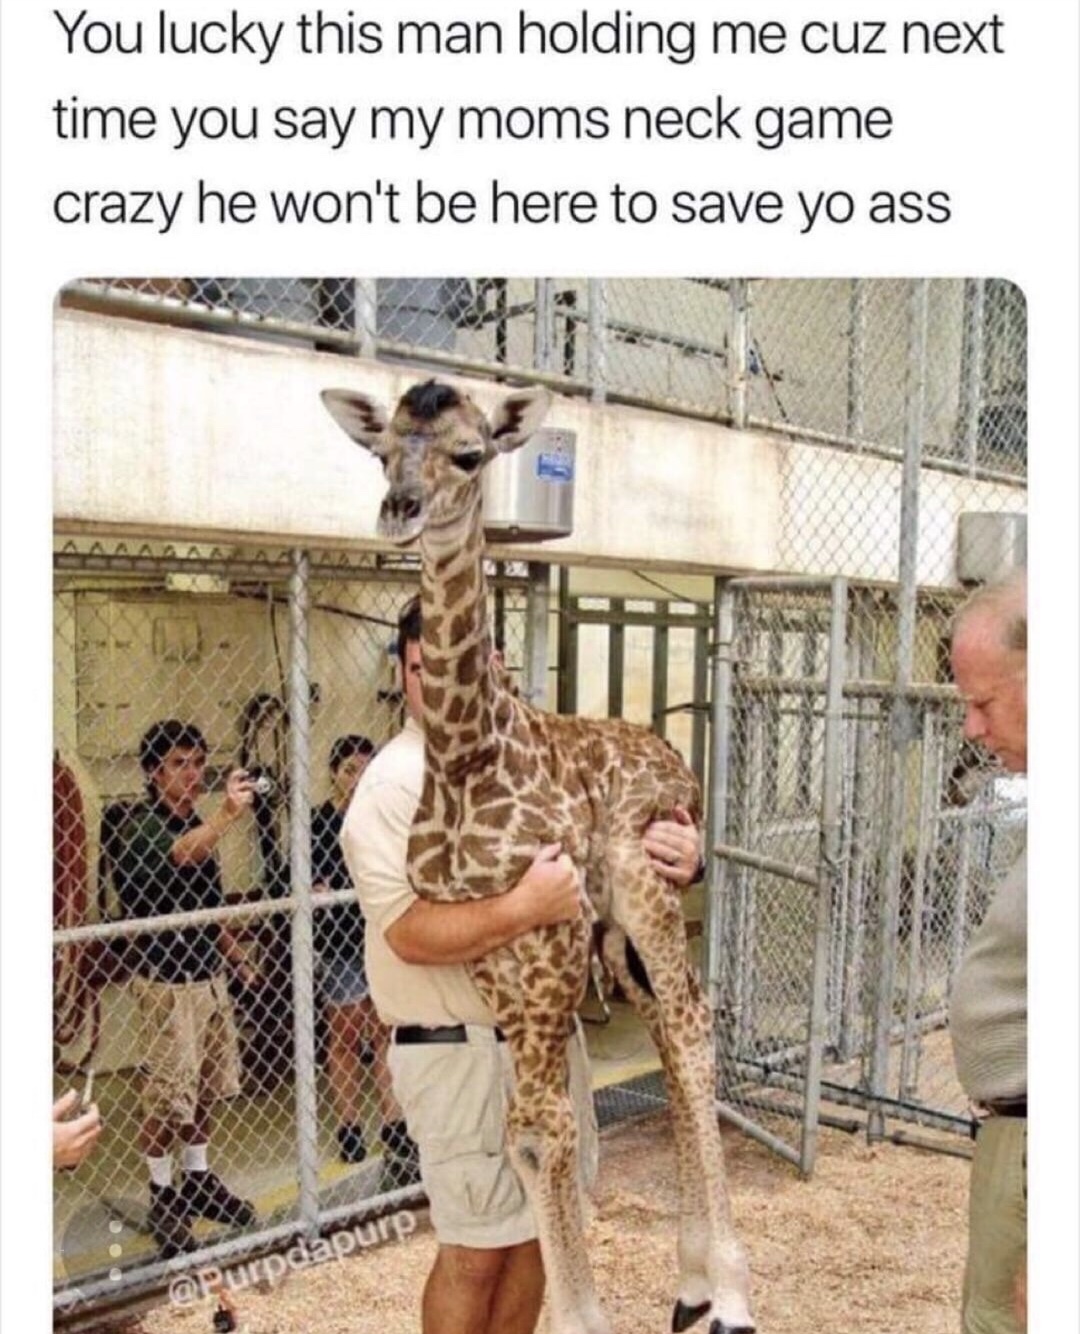 weighing baby giraffe - You lucky this man holding me cuz next time you say my moms neck game crazy he won't be here to save yo ass